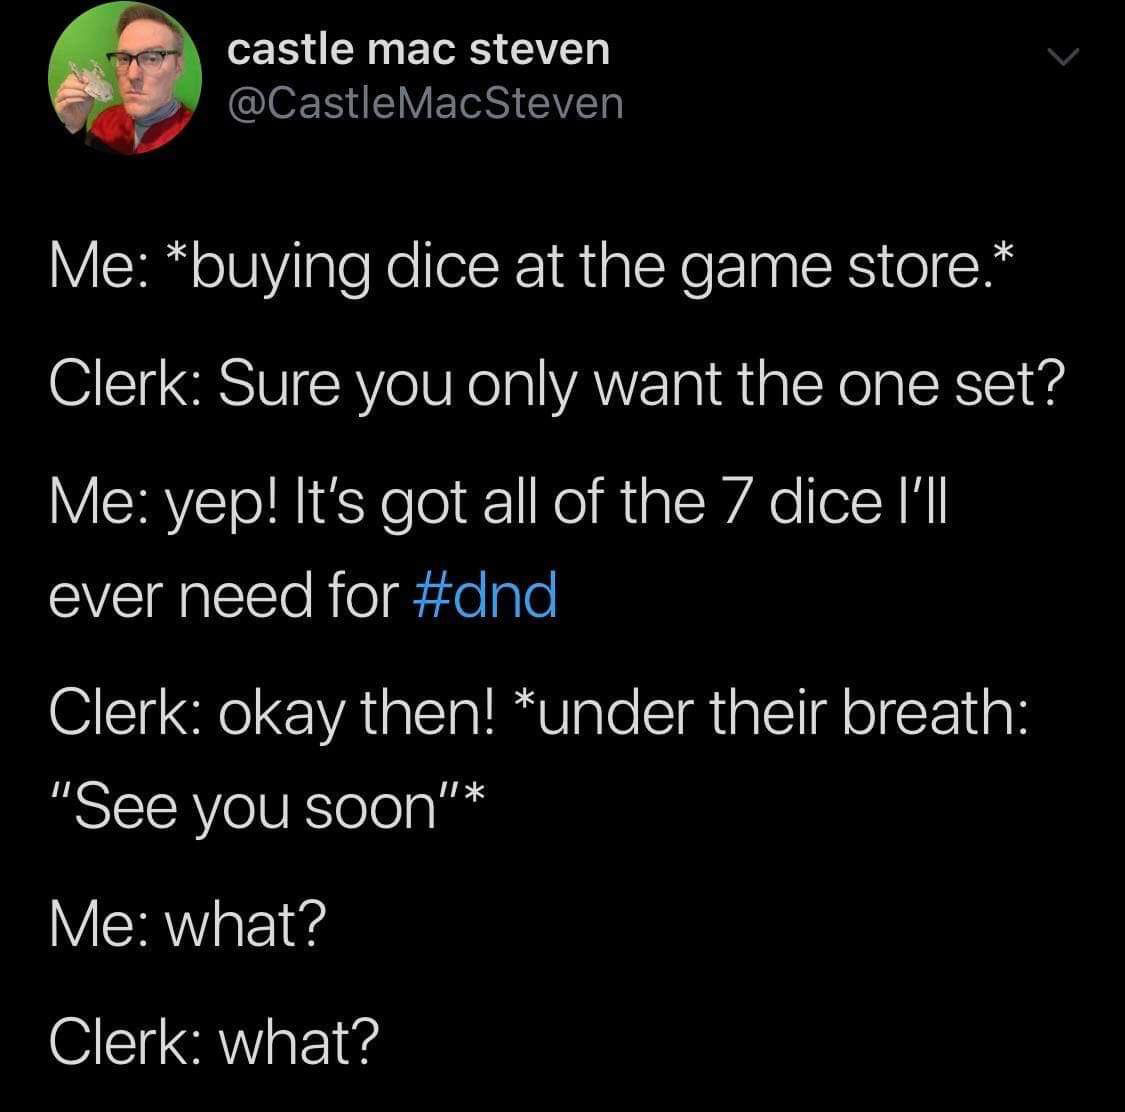 funny memes - cute cats - atmosphere - castle mac steven Mac Steven Me buying dice at the game store. Clerk Sure you only want the one set? Me yep! It's got all of the 7 dice I'll ever need for Clerk okay then! under their breath "See you soon" Me what? C